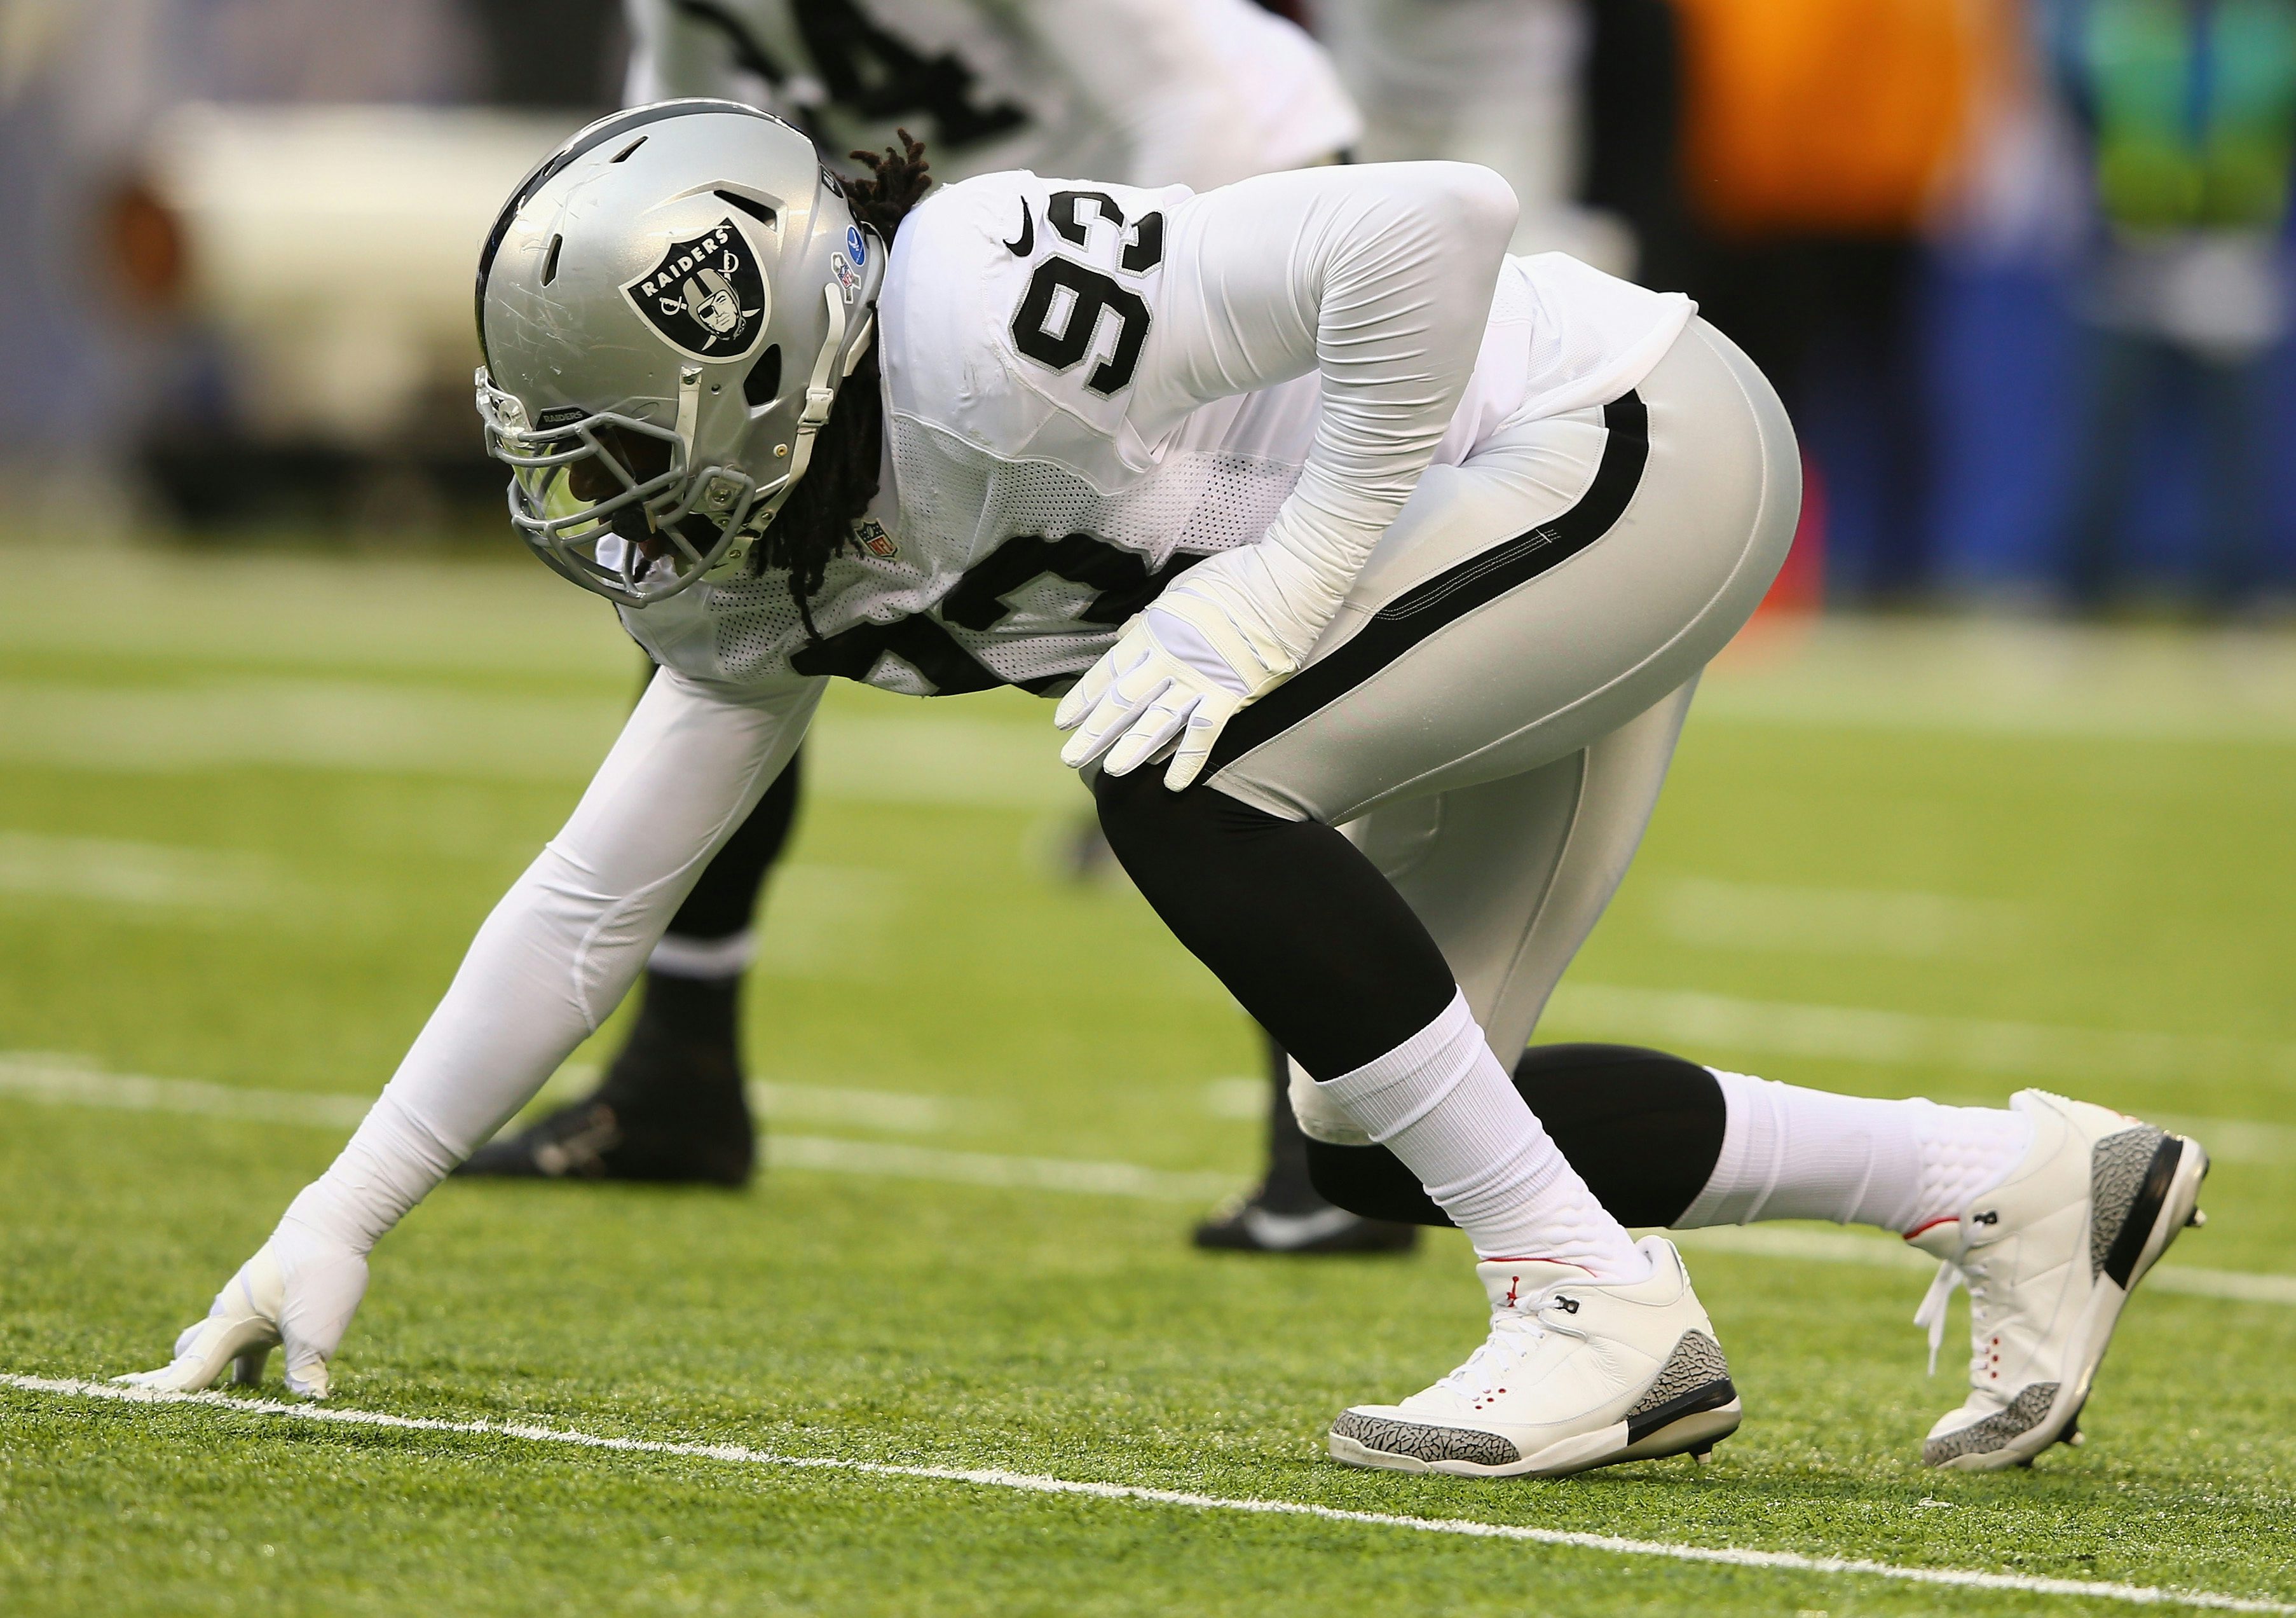 Jason Hunter of the Oakland Raiders in action against the New York Giants during their game at MetLife Stadium on November 10, 2013